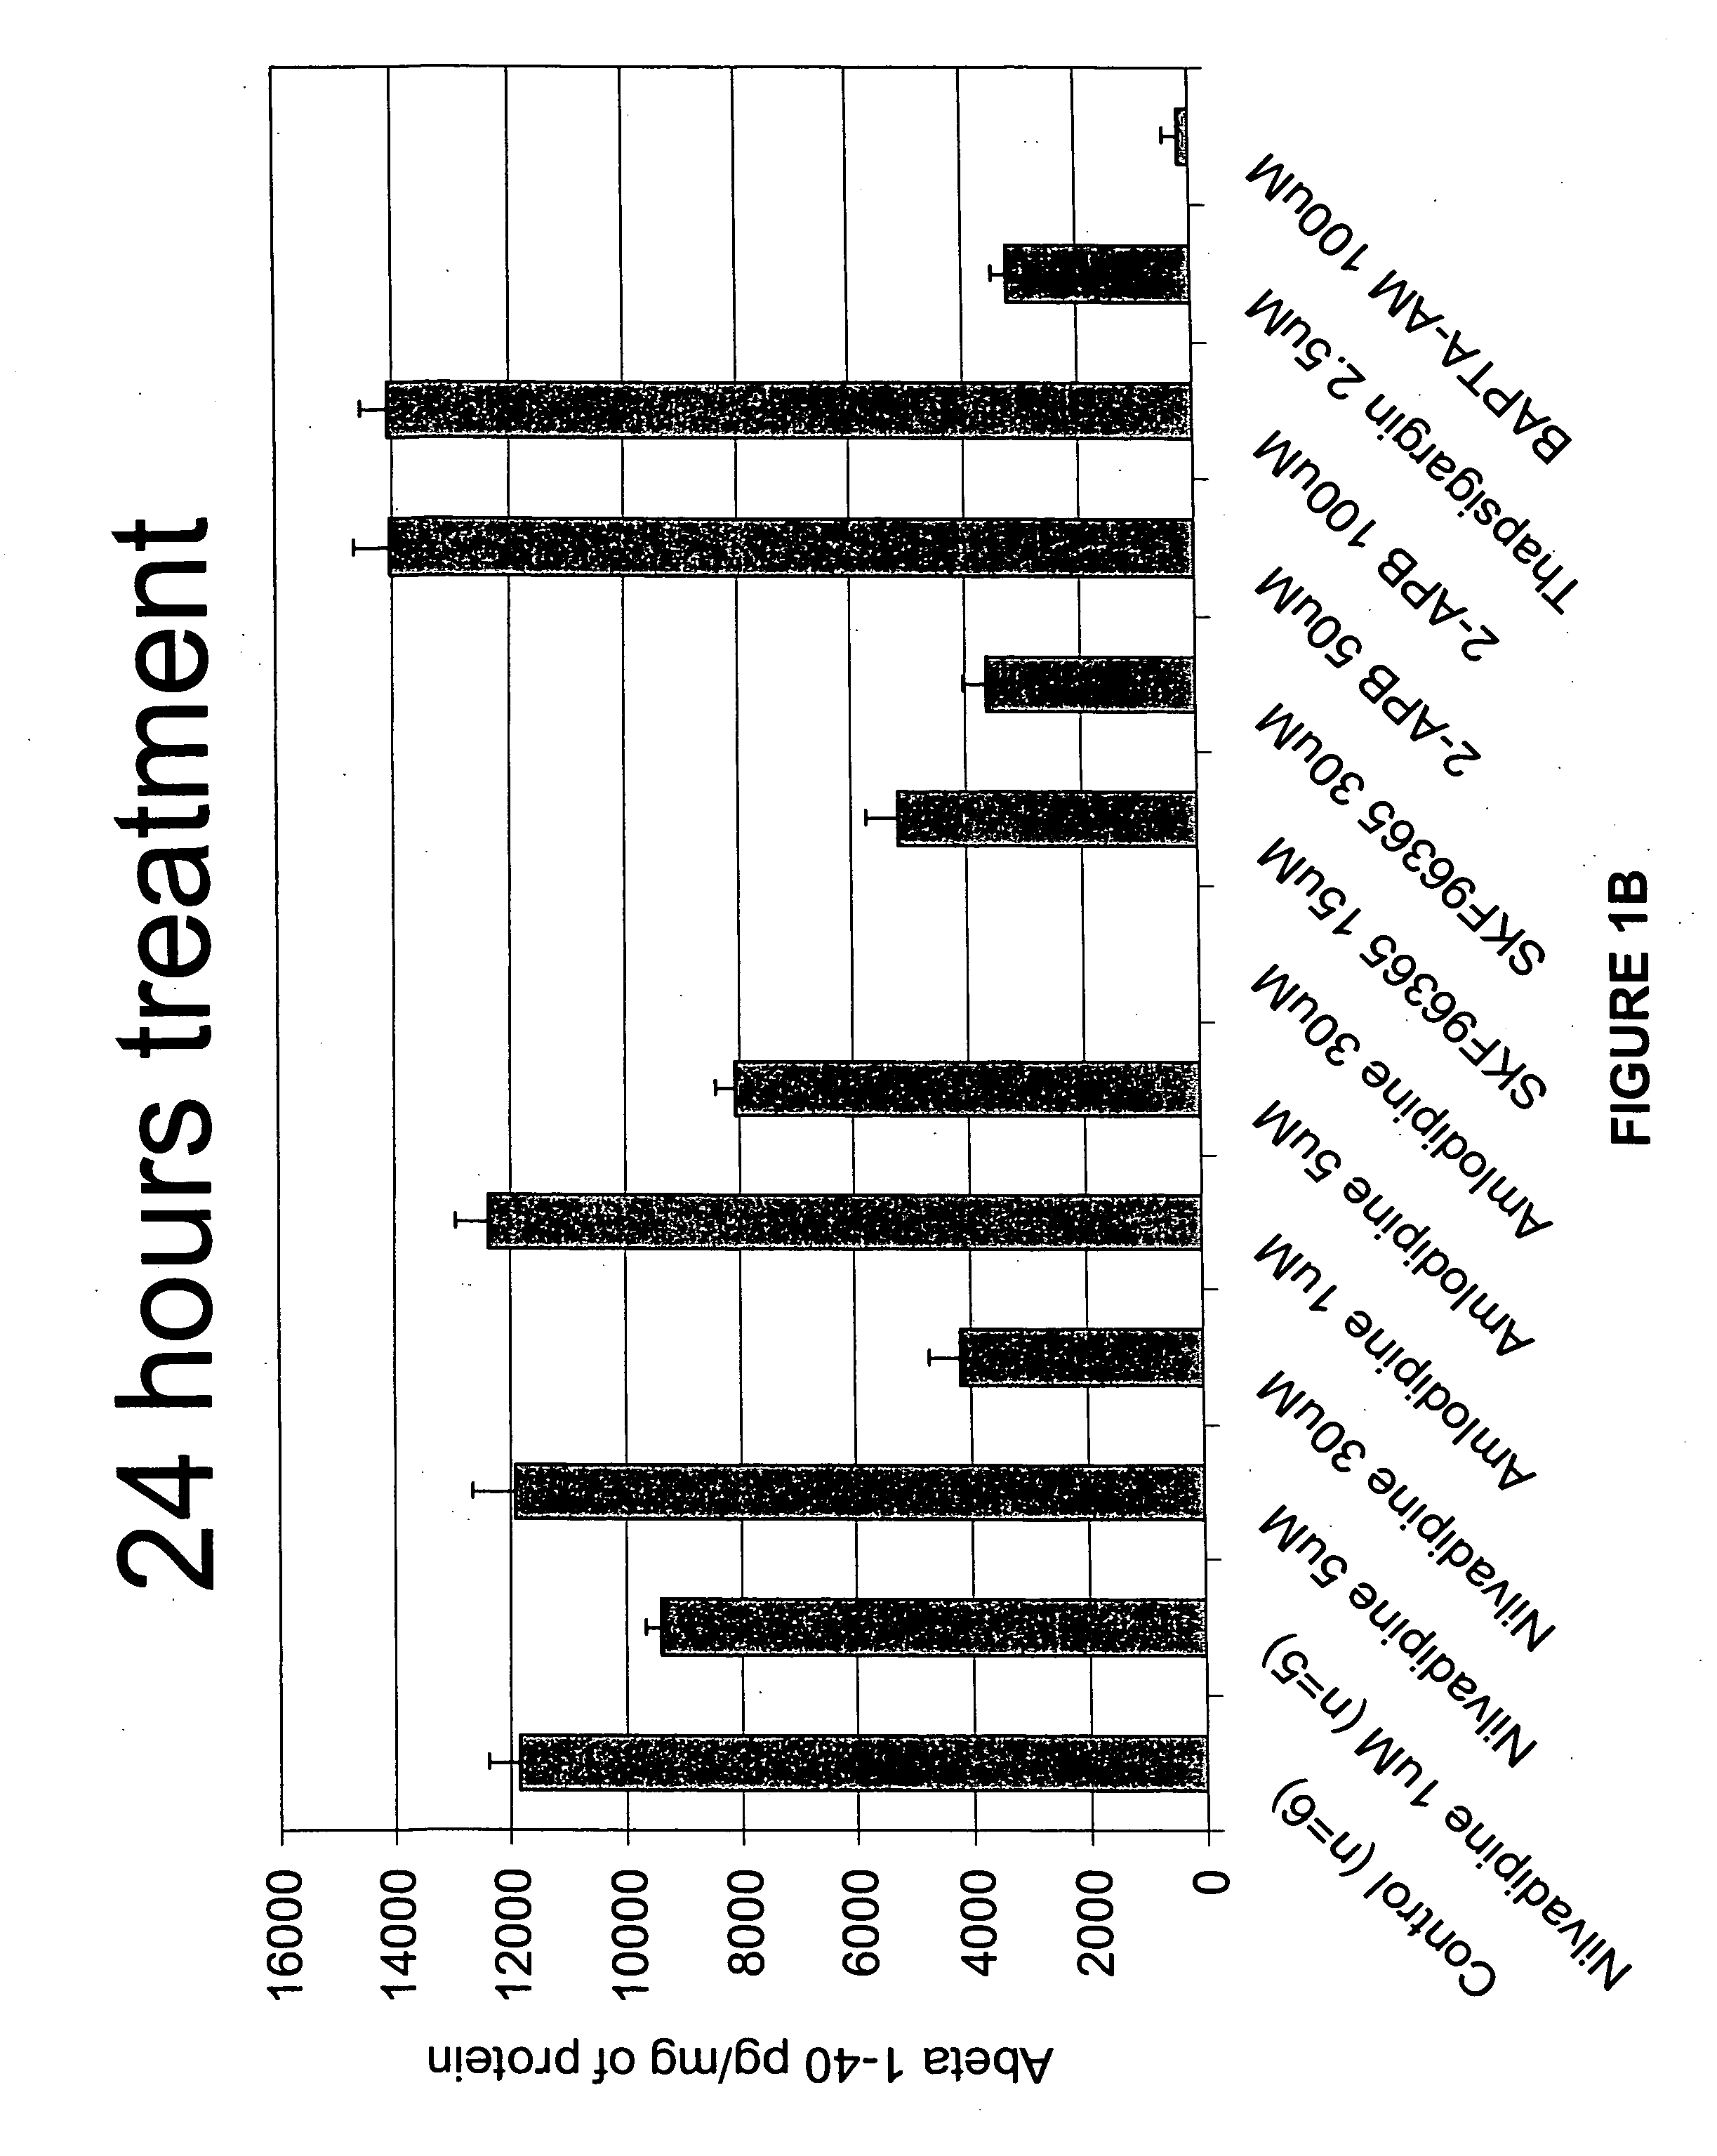 Compounds for inhibiting beta-amyloid production and methods of identifying the compounds